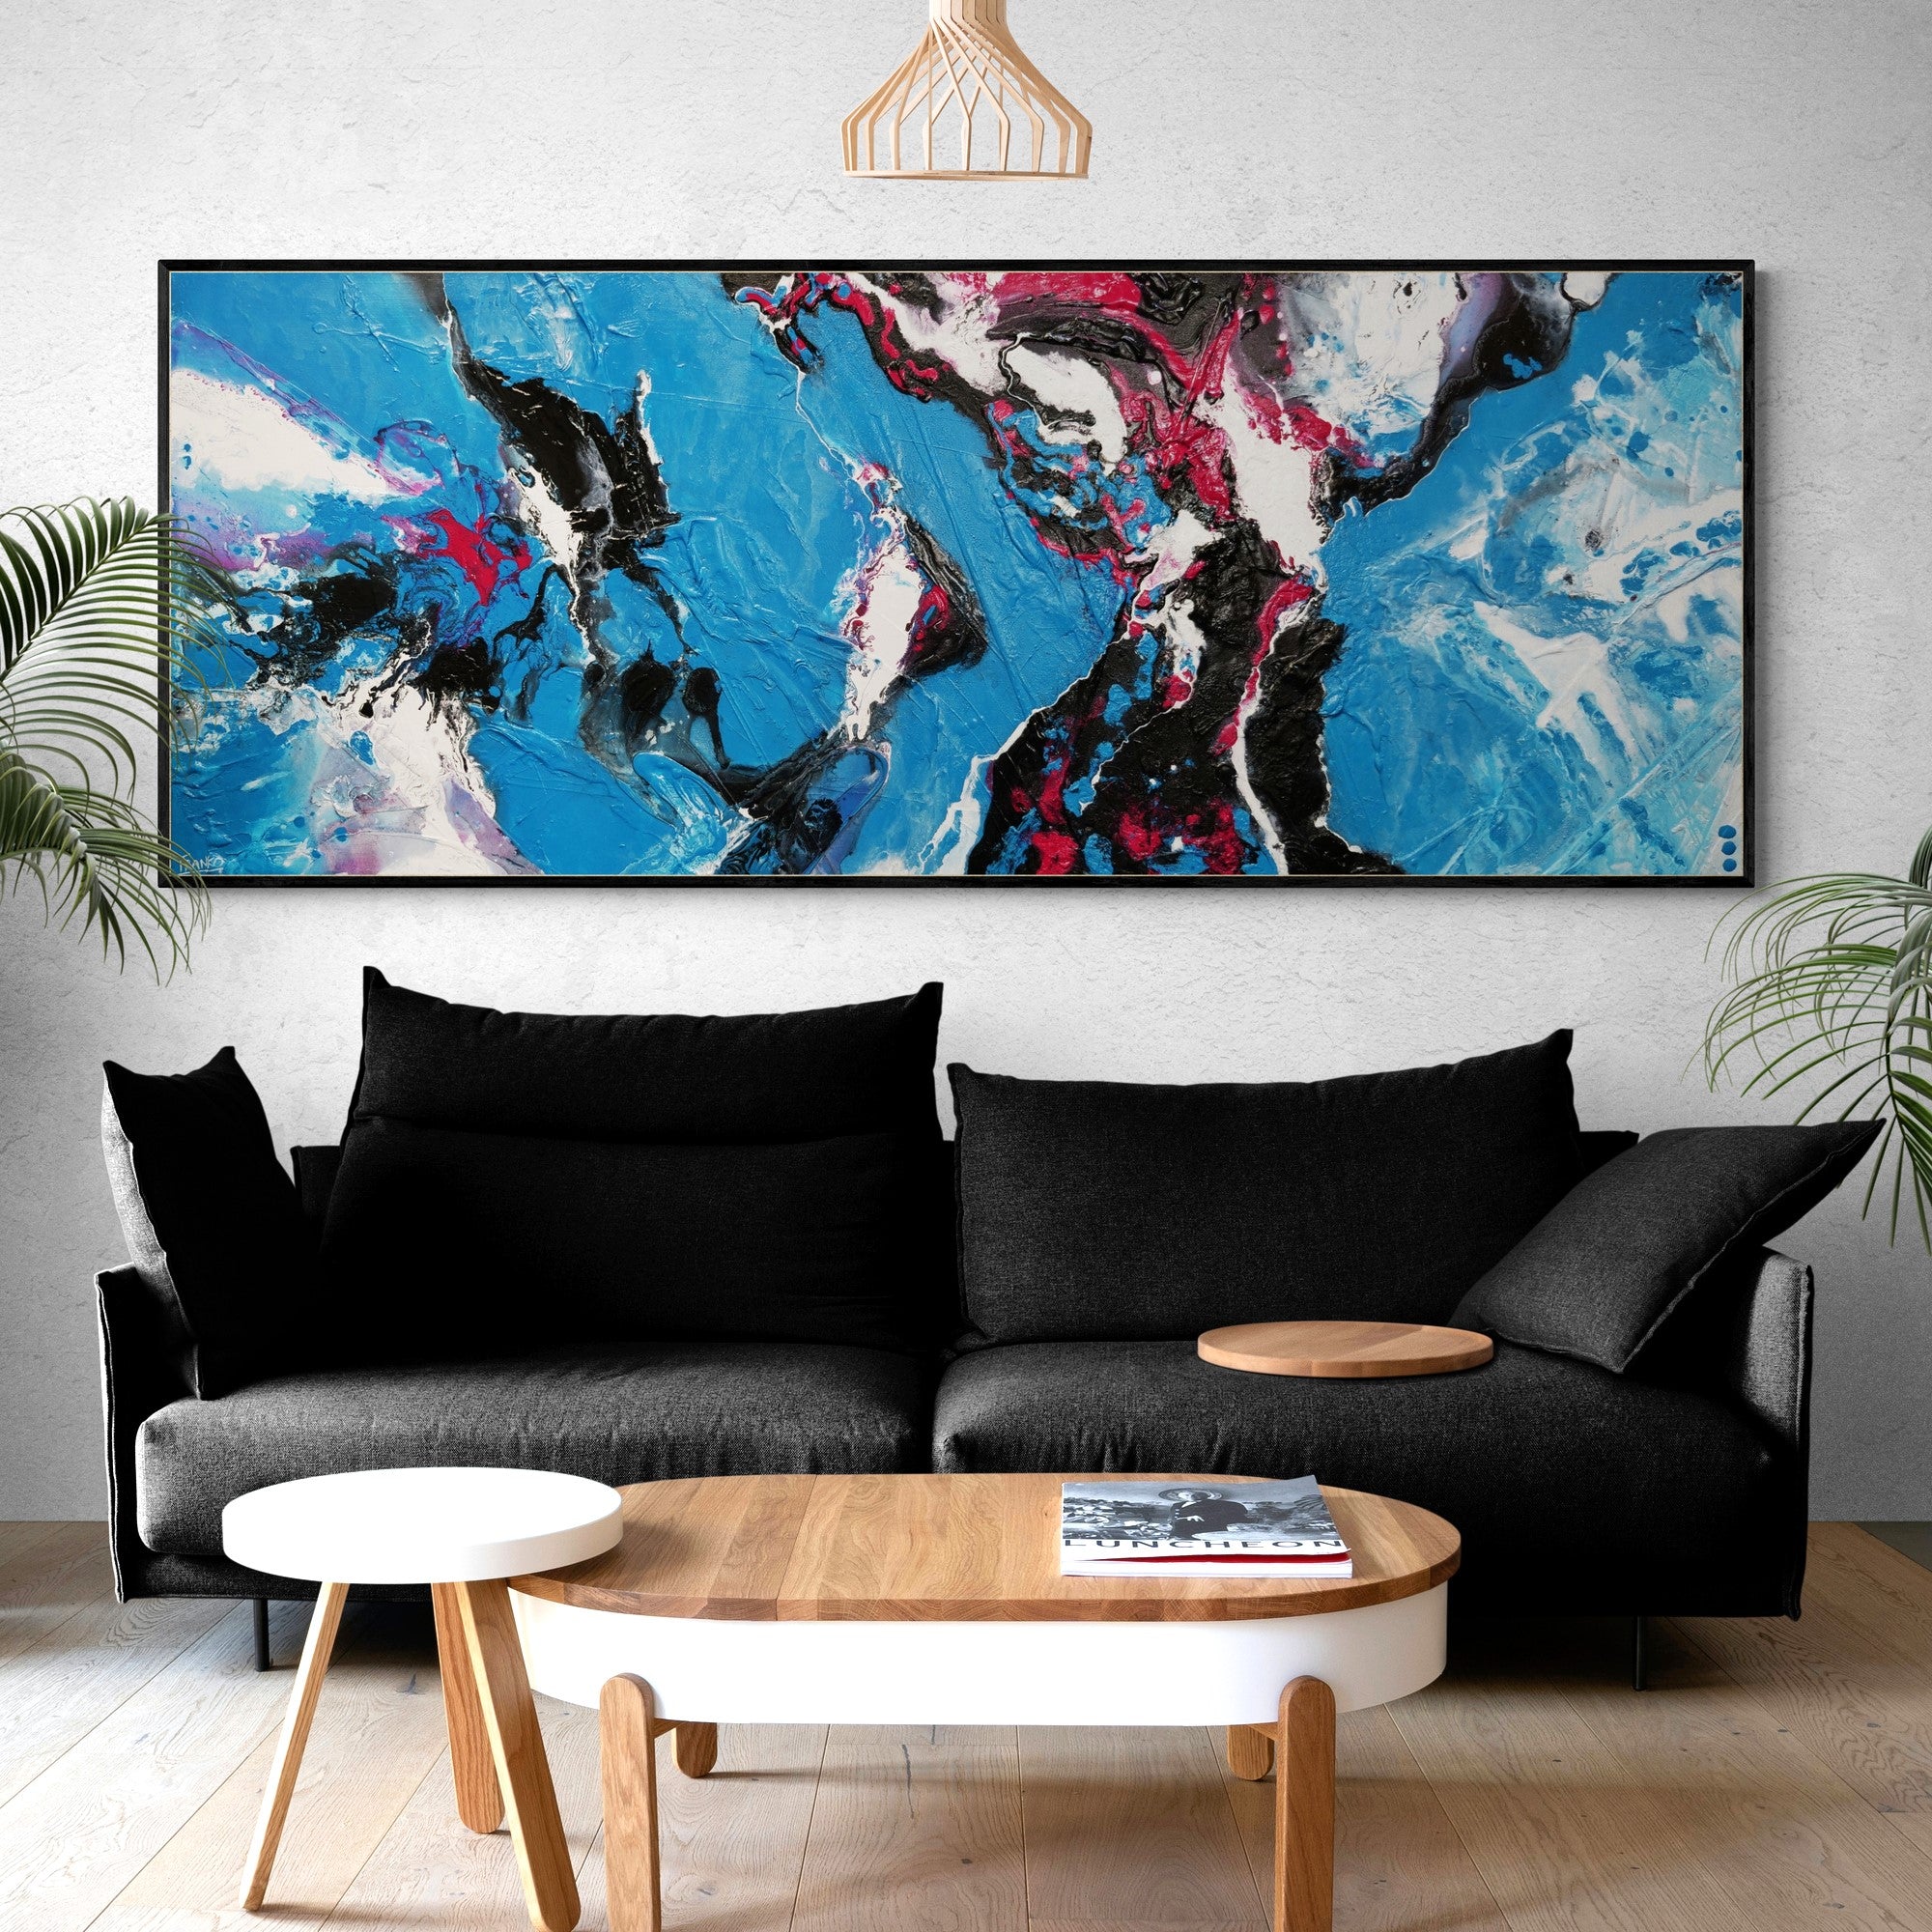 Teal Silk 200cm x 80cm Teal Magenta Textured Abstract Painting